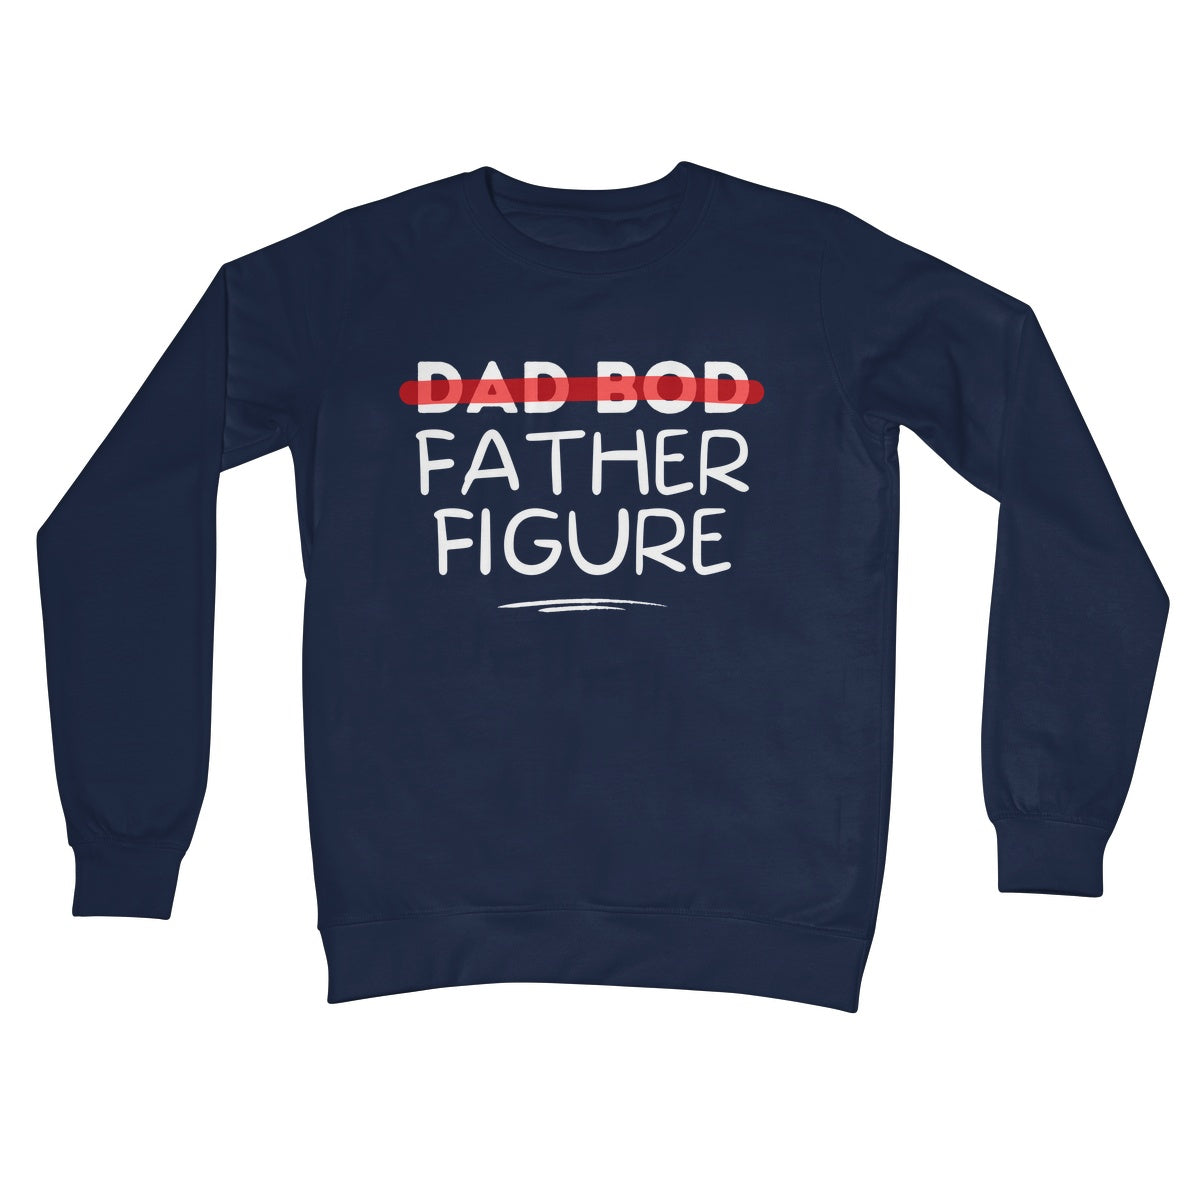 dad bod father figure jumper navy